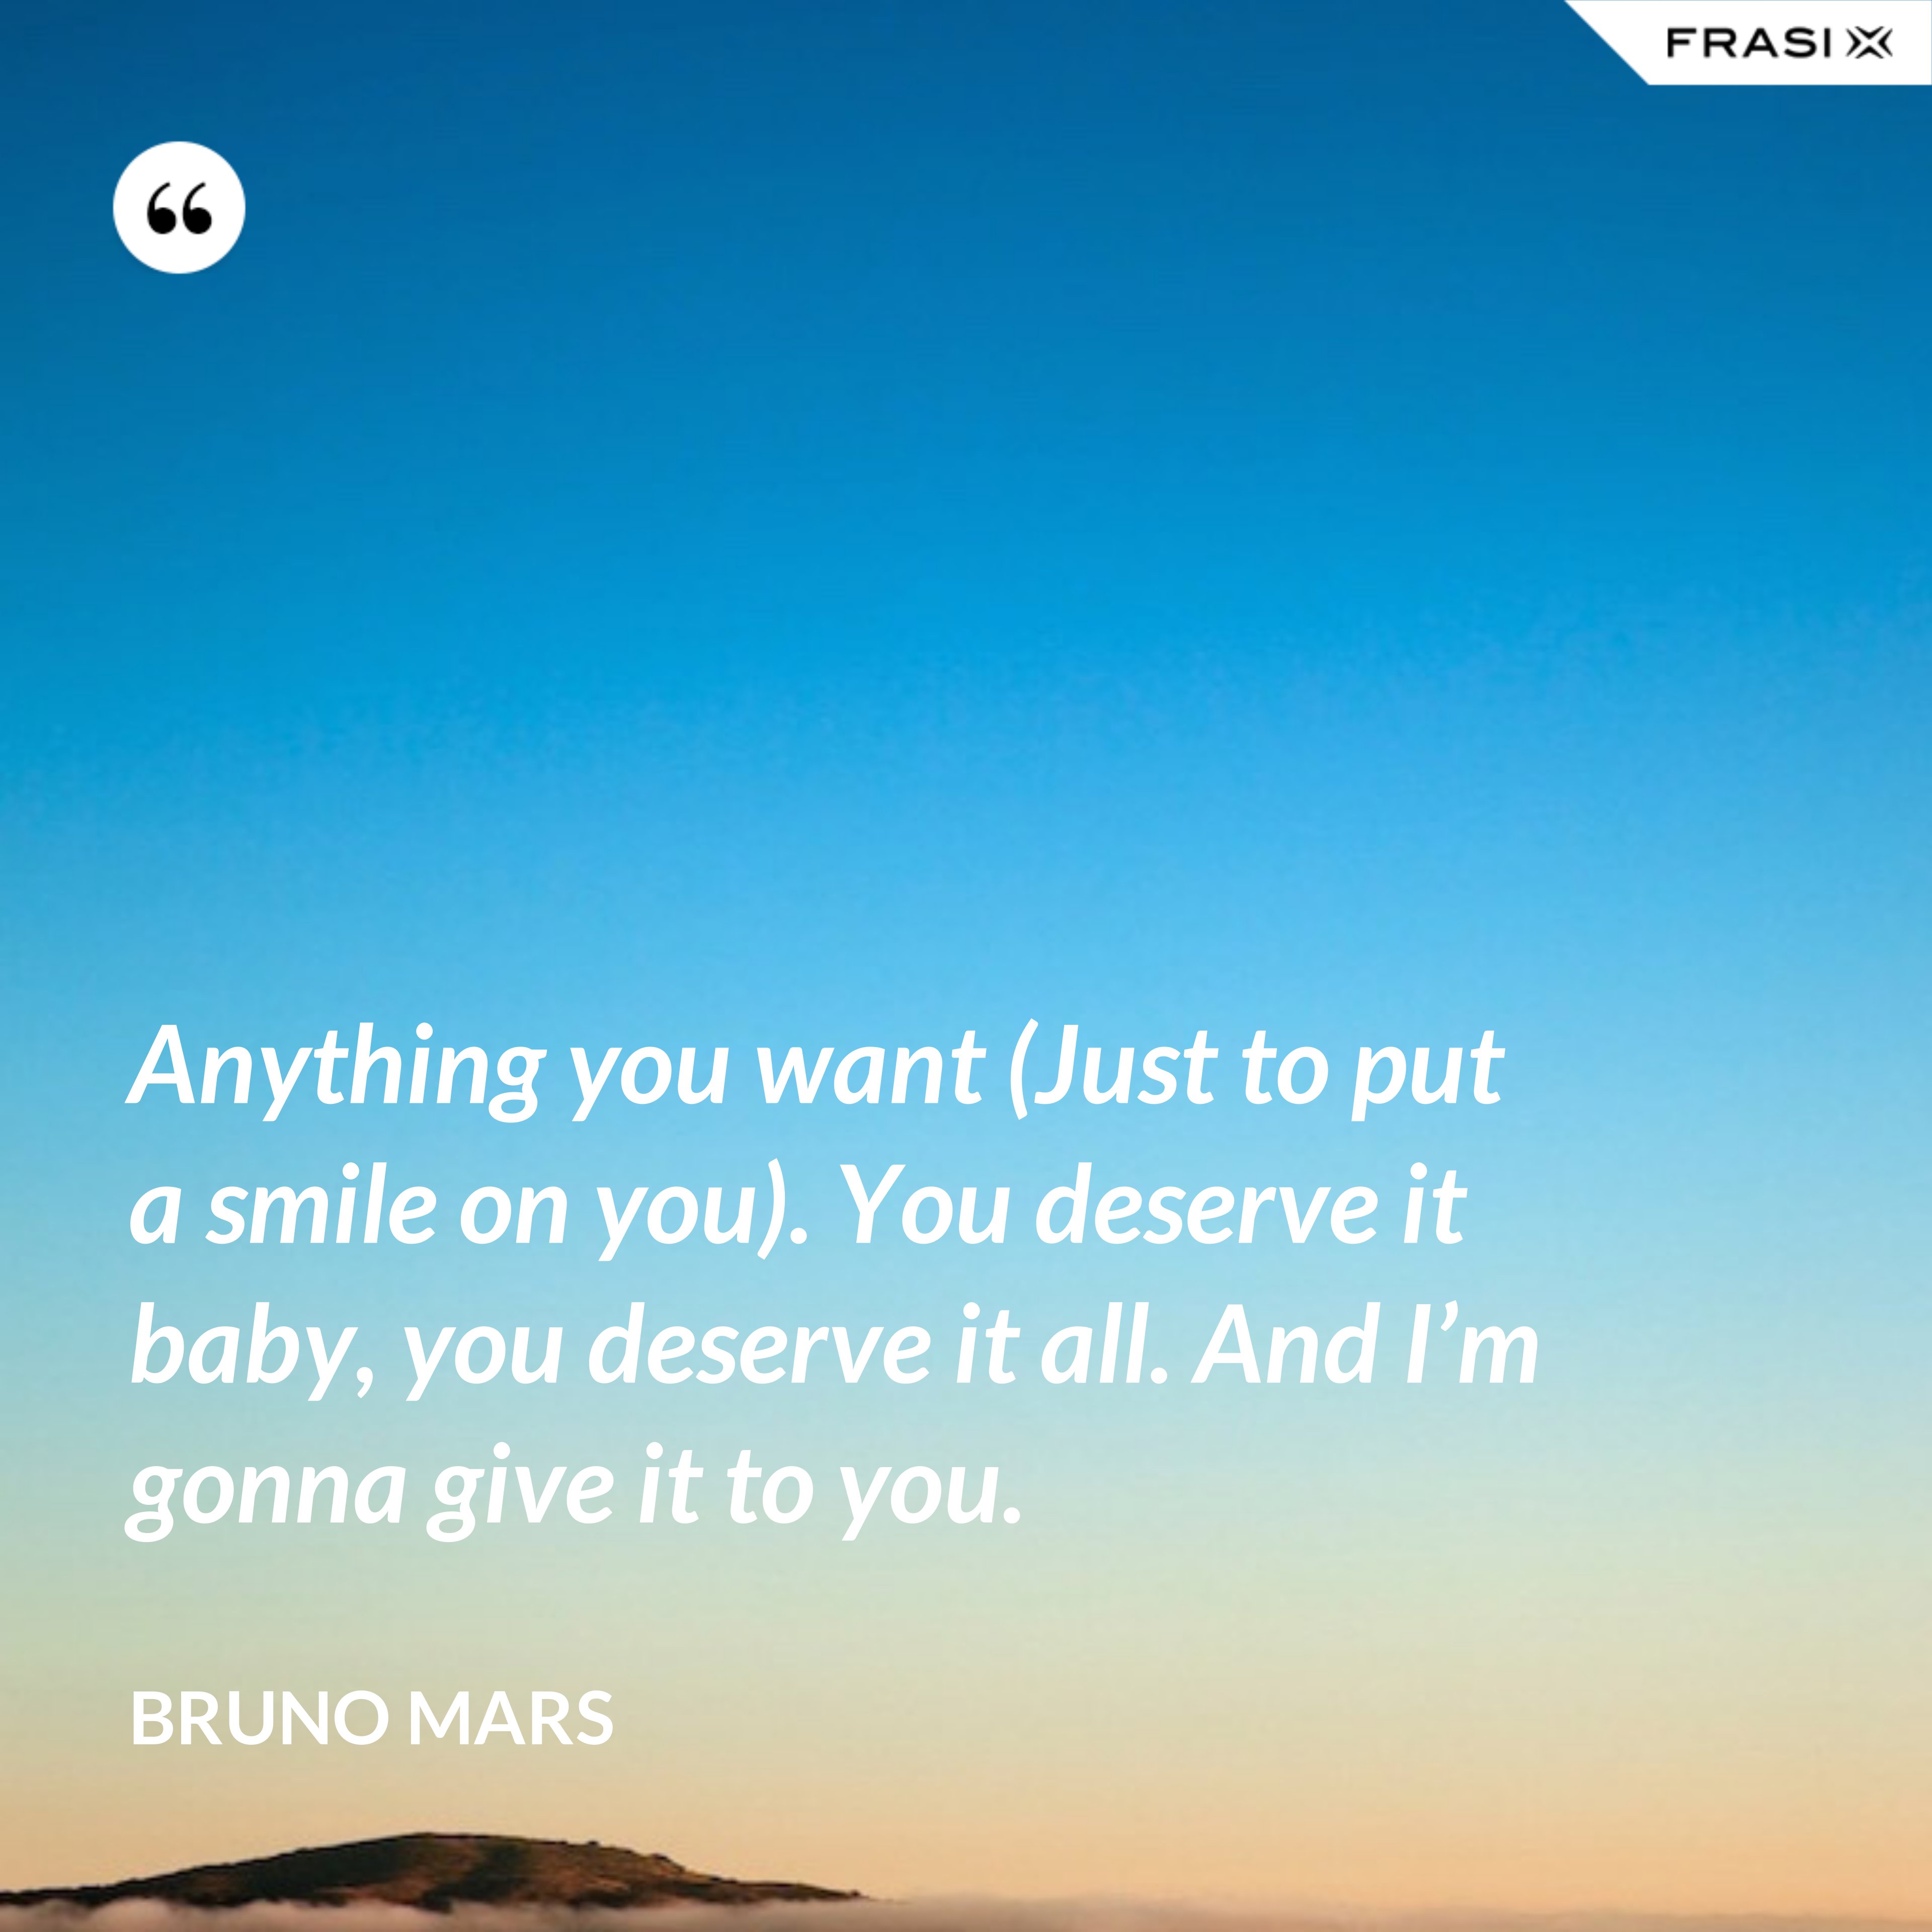 Anything you want (Just to put a smile on you). You deserve it baby, you deserve it all. And I’m gonna give it to you. - Bruno Mars